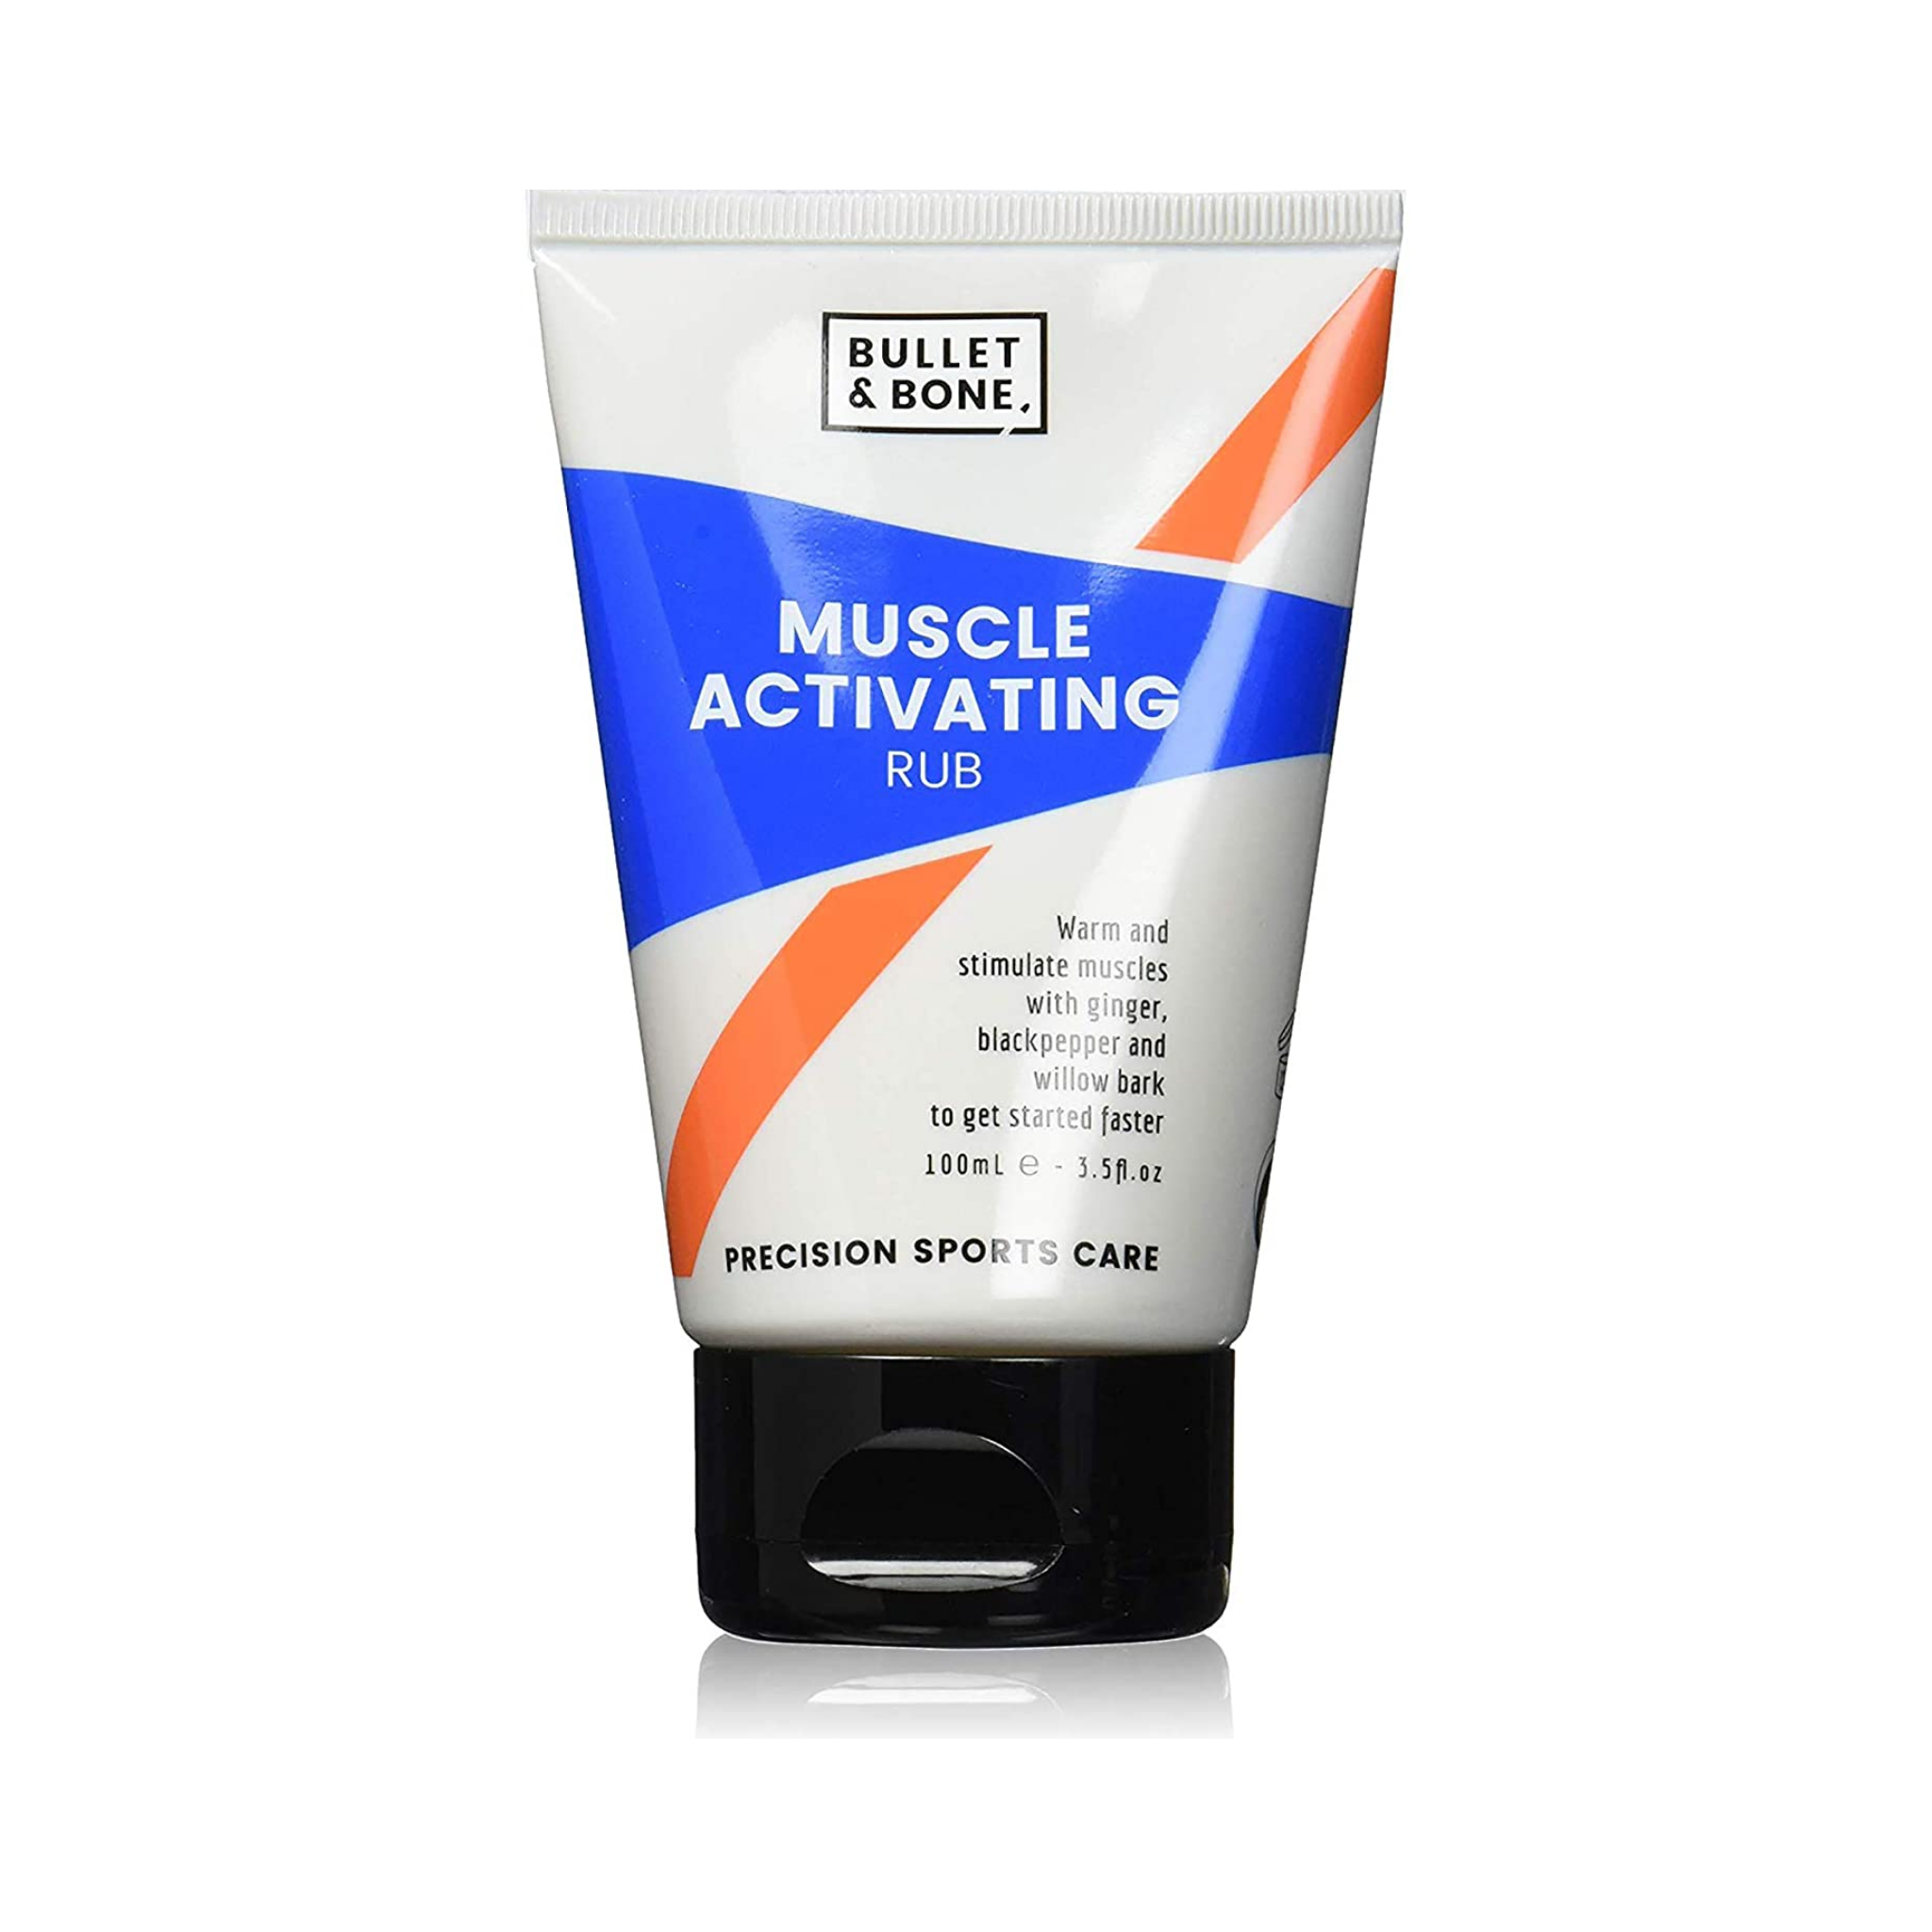 Bullet & Bone Muscle Activating Rub